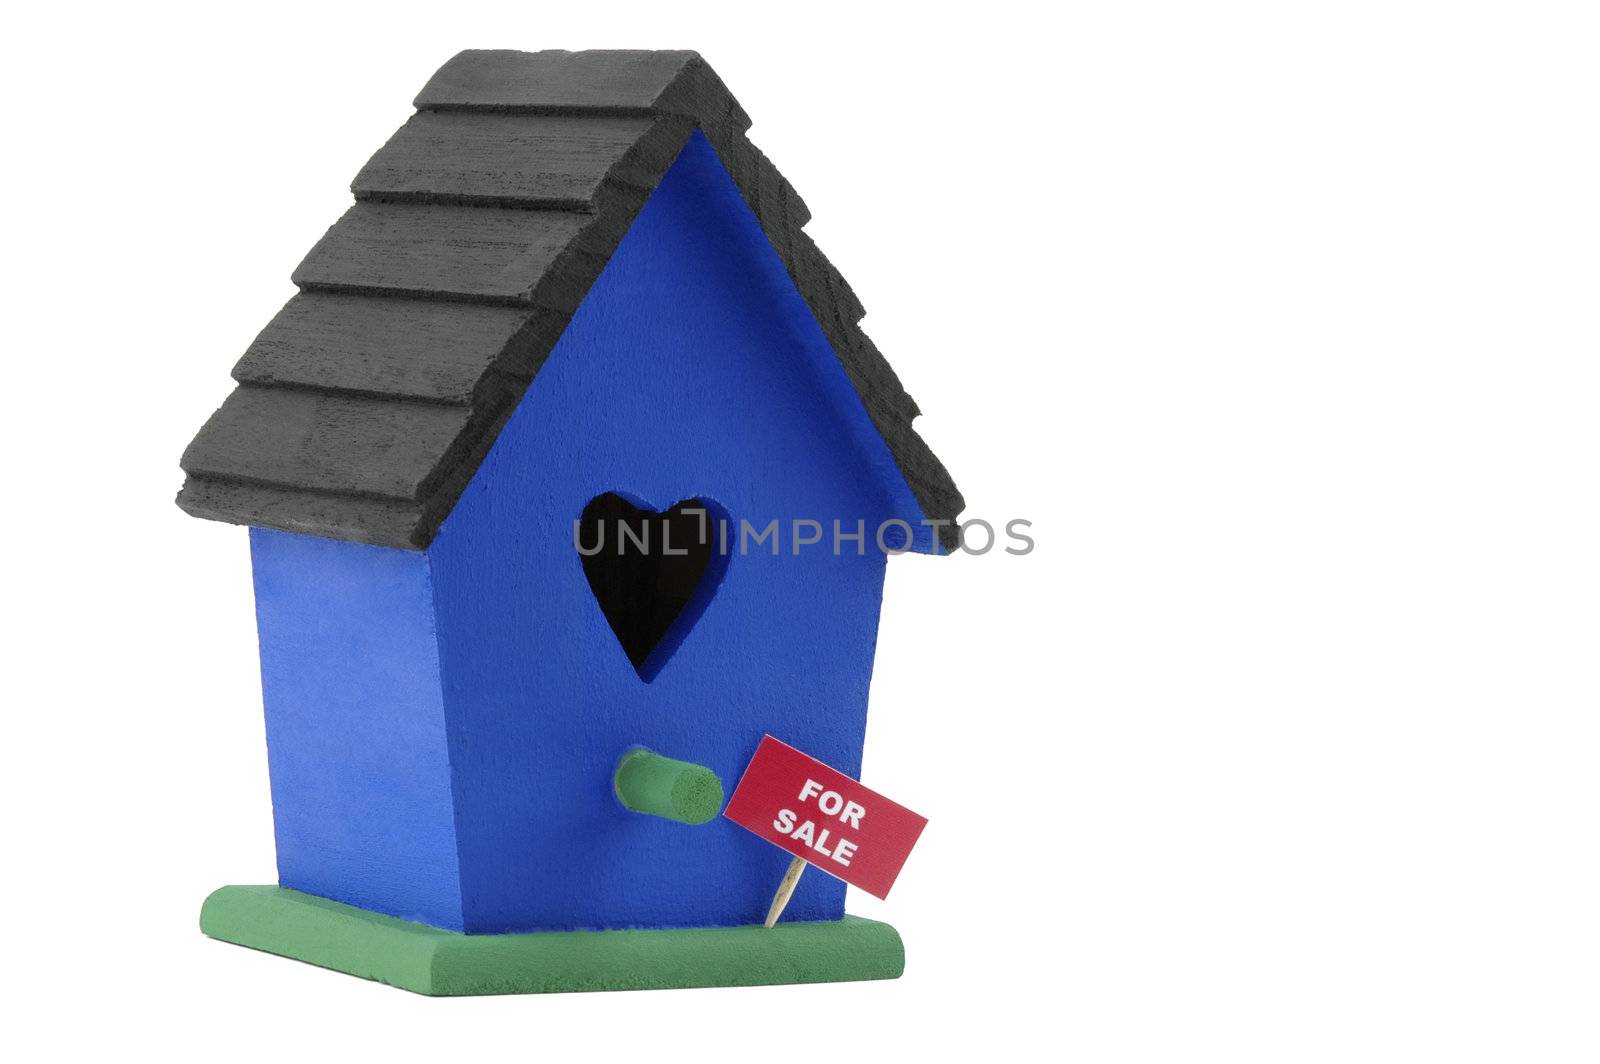 Birdhouse For Sale by billberryphotography